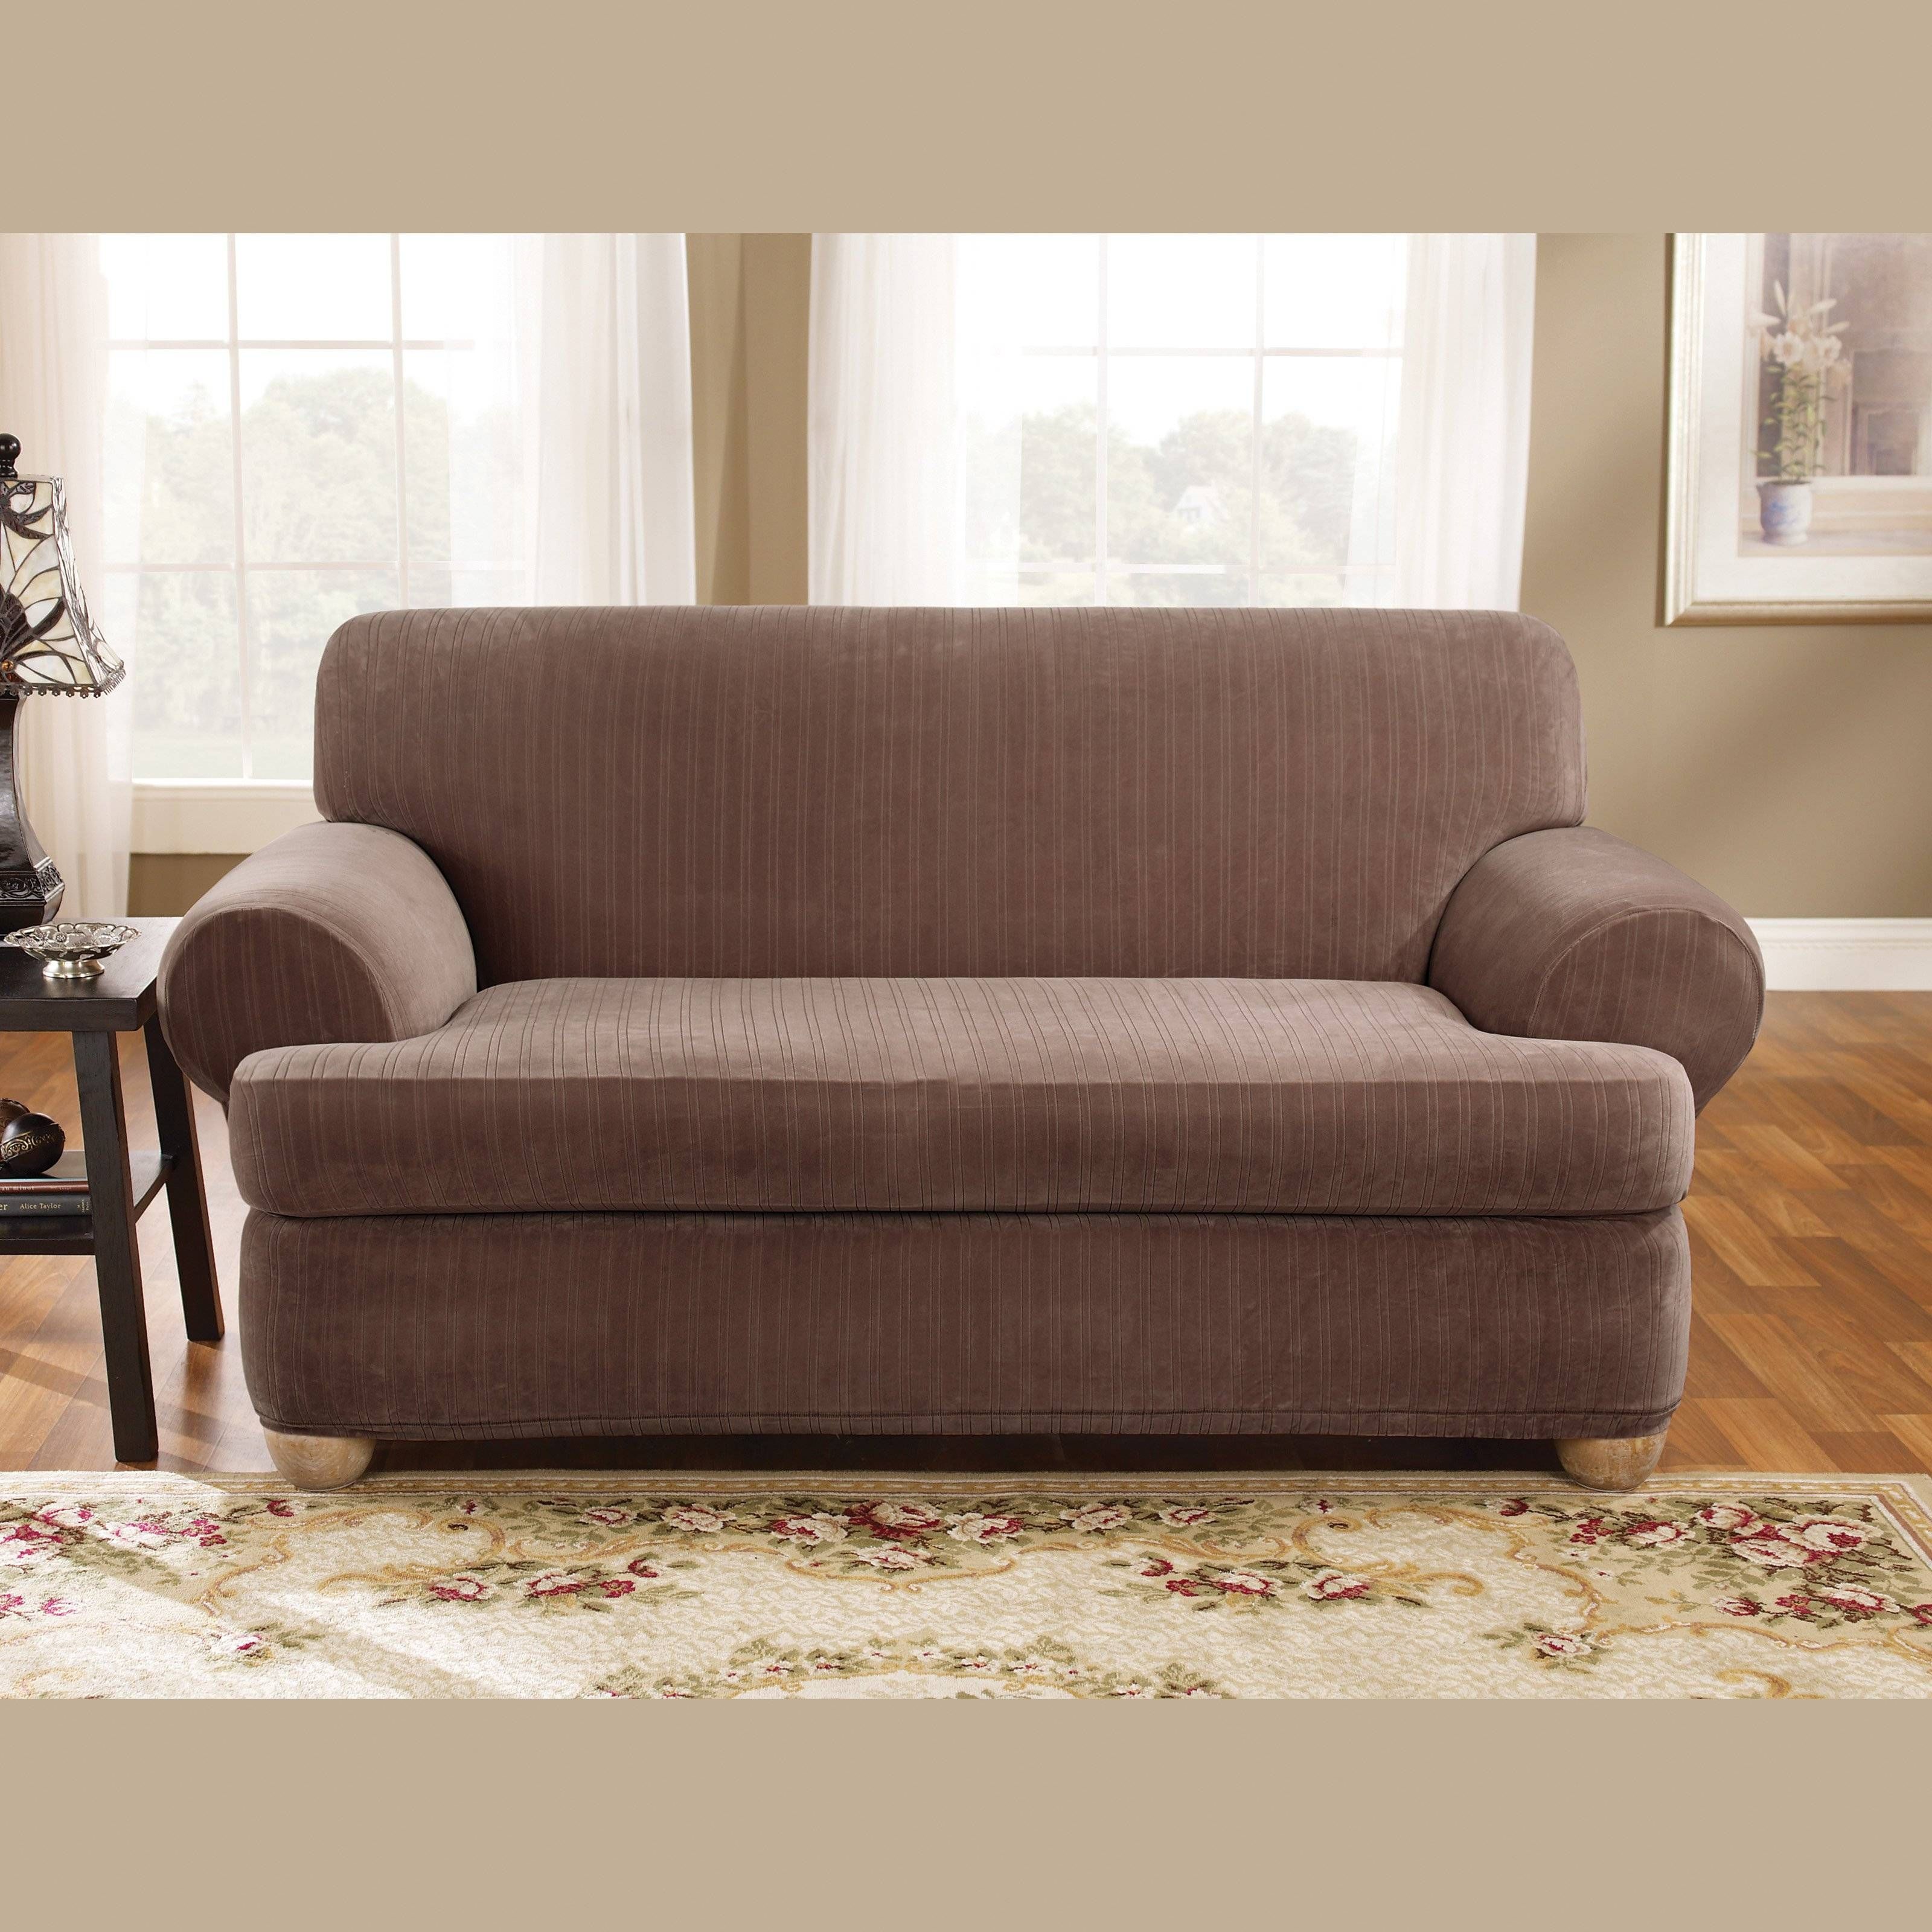 Furniture: Cool Stretch Sofa Covers To Protect And Renew Your Sofa Pertaining To 3 Piece Sofa Slipcovers (View 7 of 15)